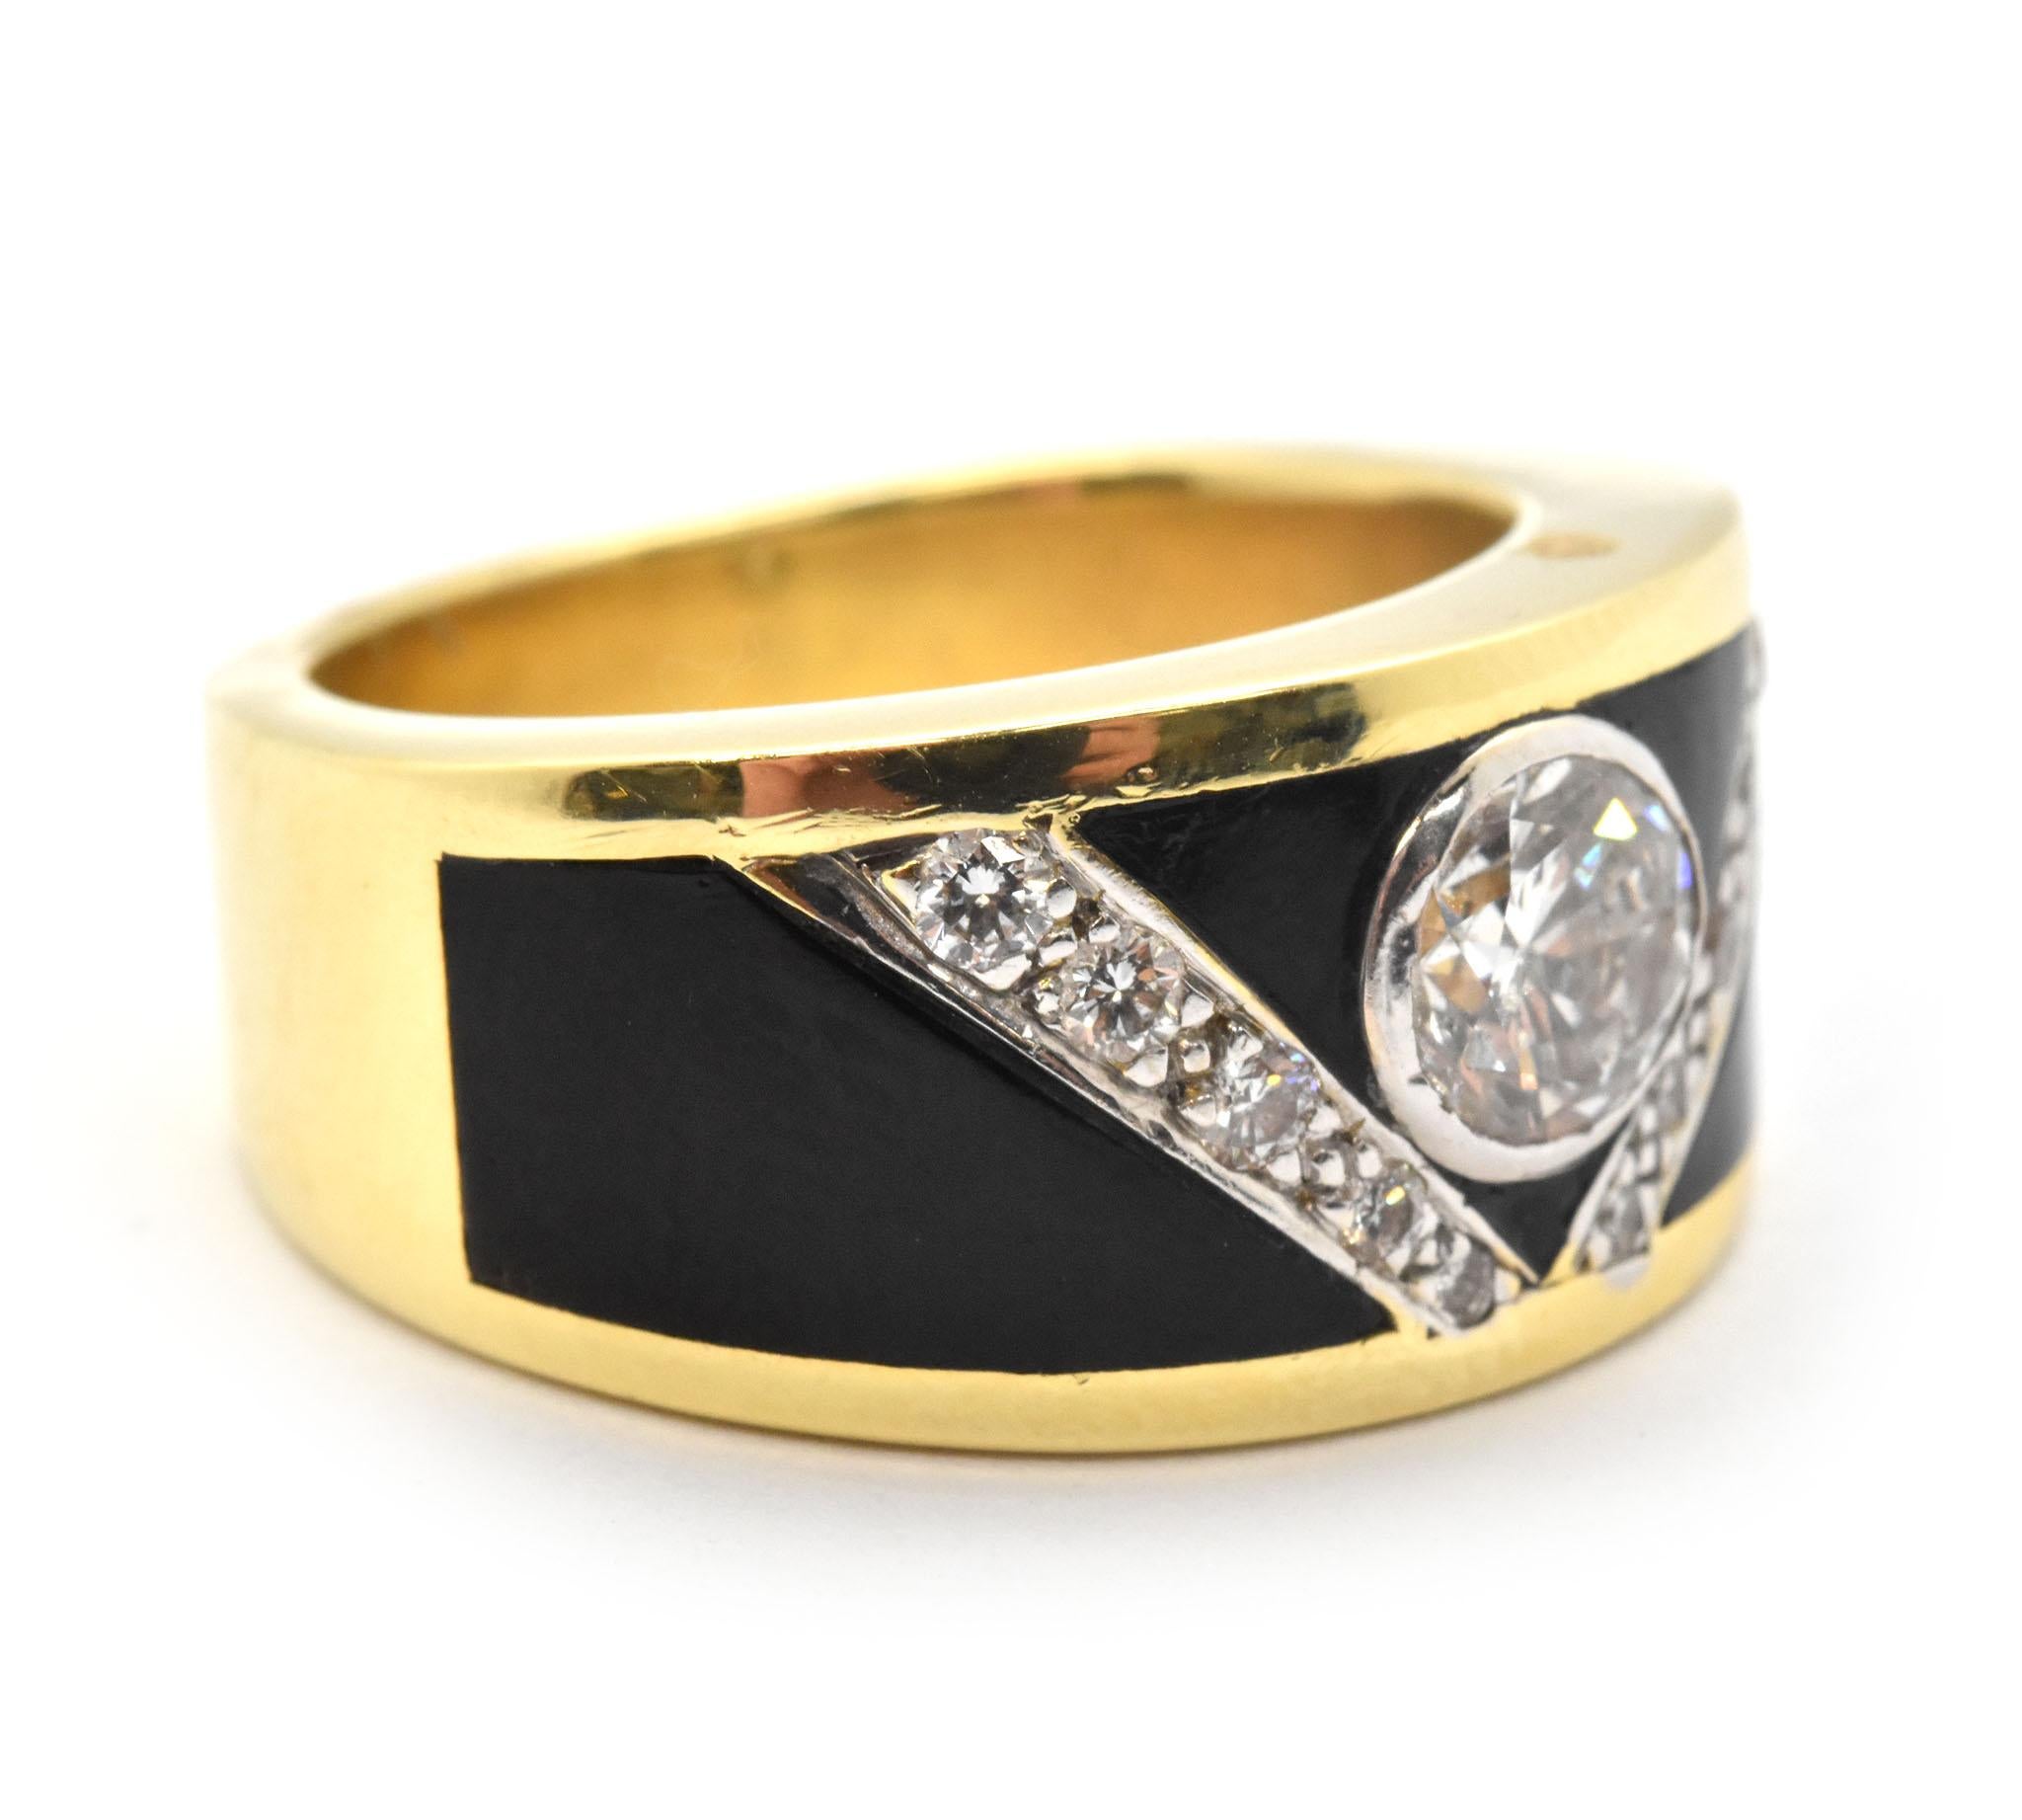 This gorgeous band is made in 18k yellow gold. It features onyx inlay accented by sparkling round diamonds. The center diamond weighs 0.90ct, and it is graded H in color and SI2 in clarity. The accent diamonds have an additional weight of 0.24ct and